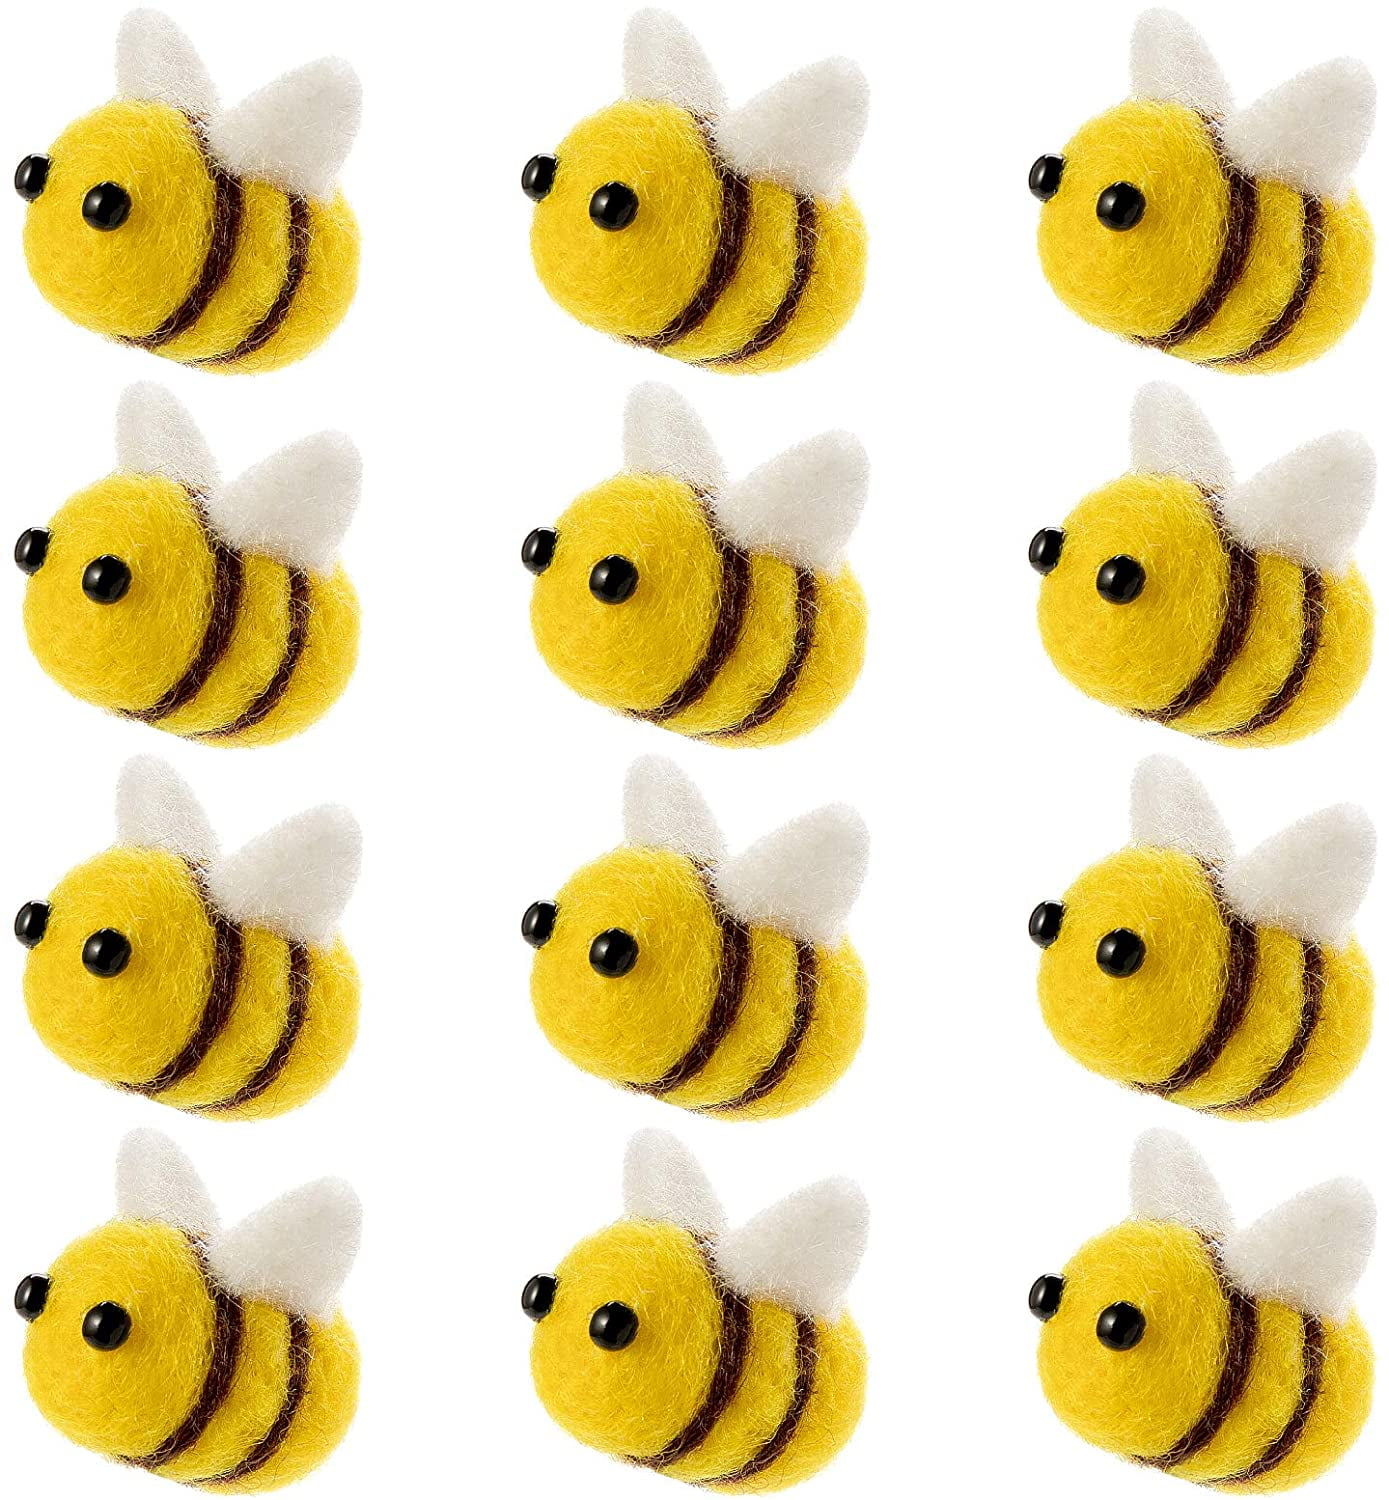 TIANTIAN 20 Pcs Wool Felt Bee Craft Decor Cartoon Animal Brooch Accessories Bee Plush Party Decorations for Christmas Clothing Tent Hat Decoration DIY and Handmade Crafts Jewelry Accessory Ginger 